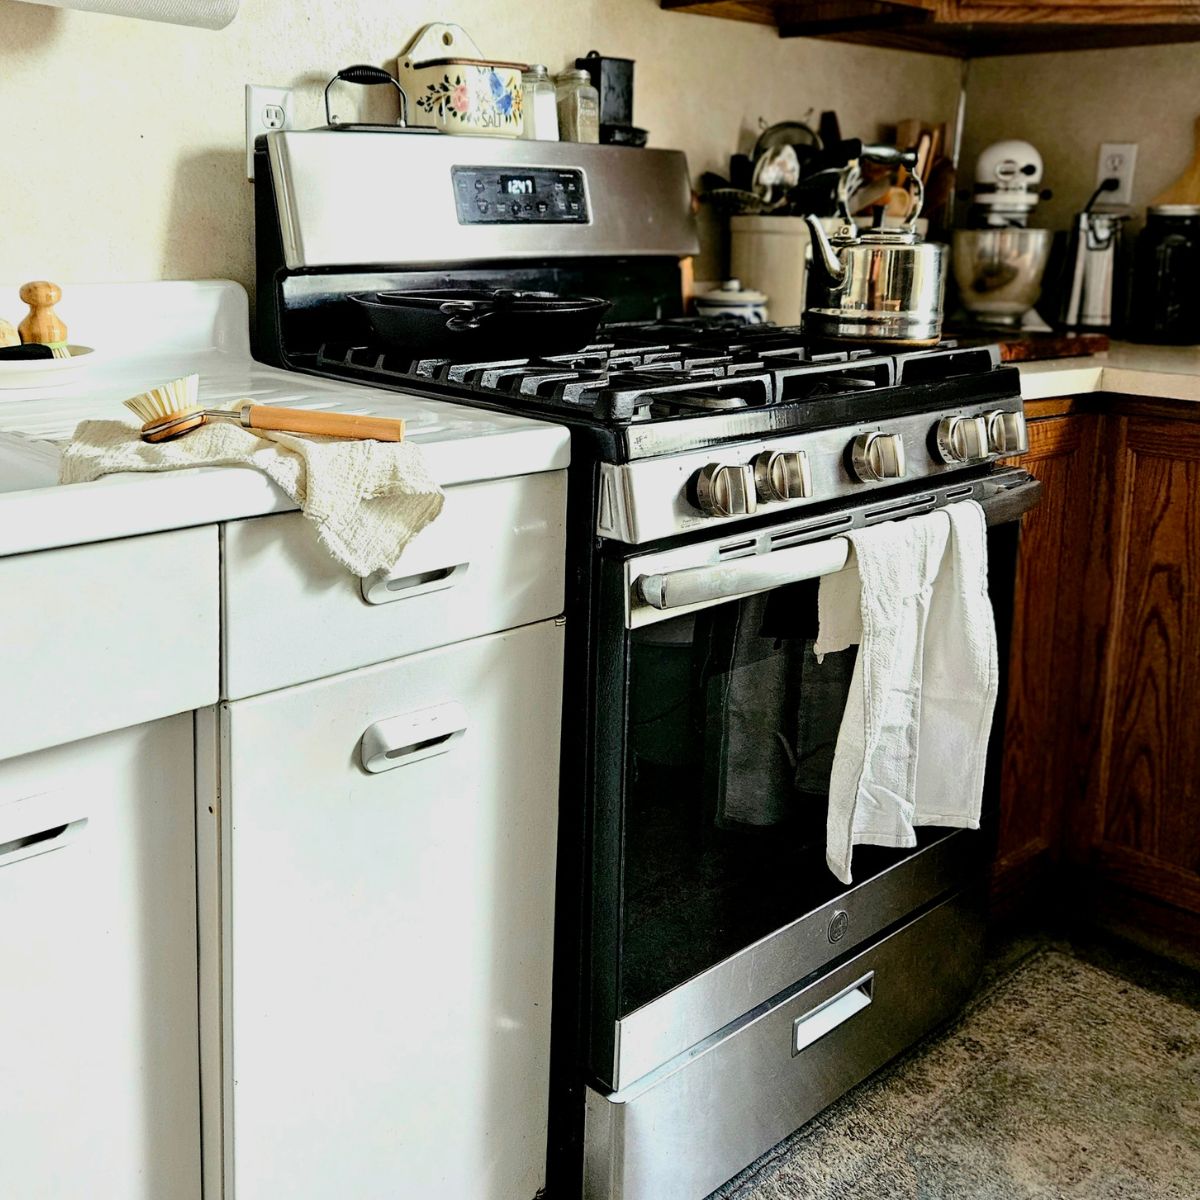 How to Clean Stainless Steel Appliances & Smudge-Free